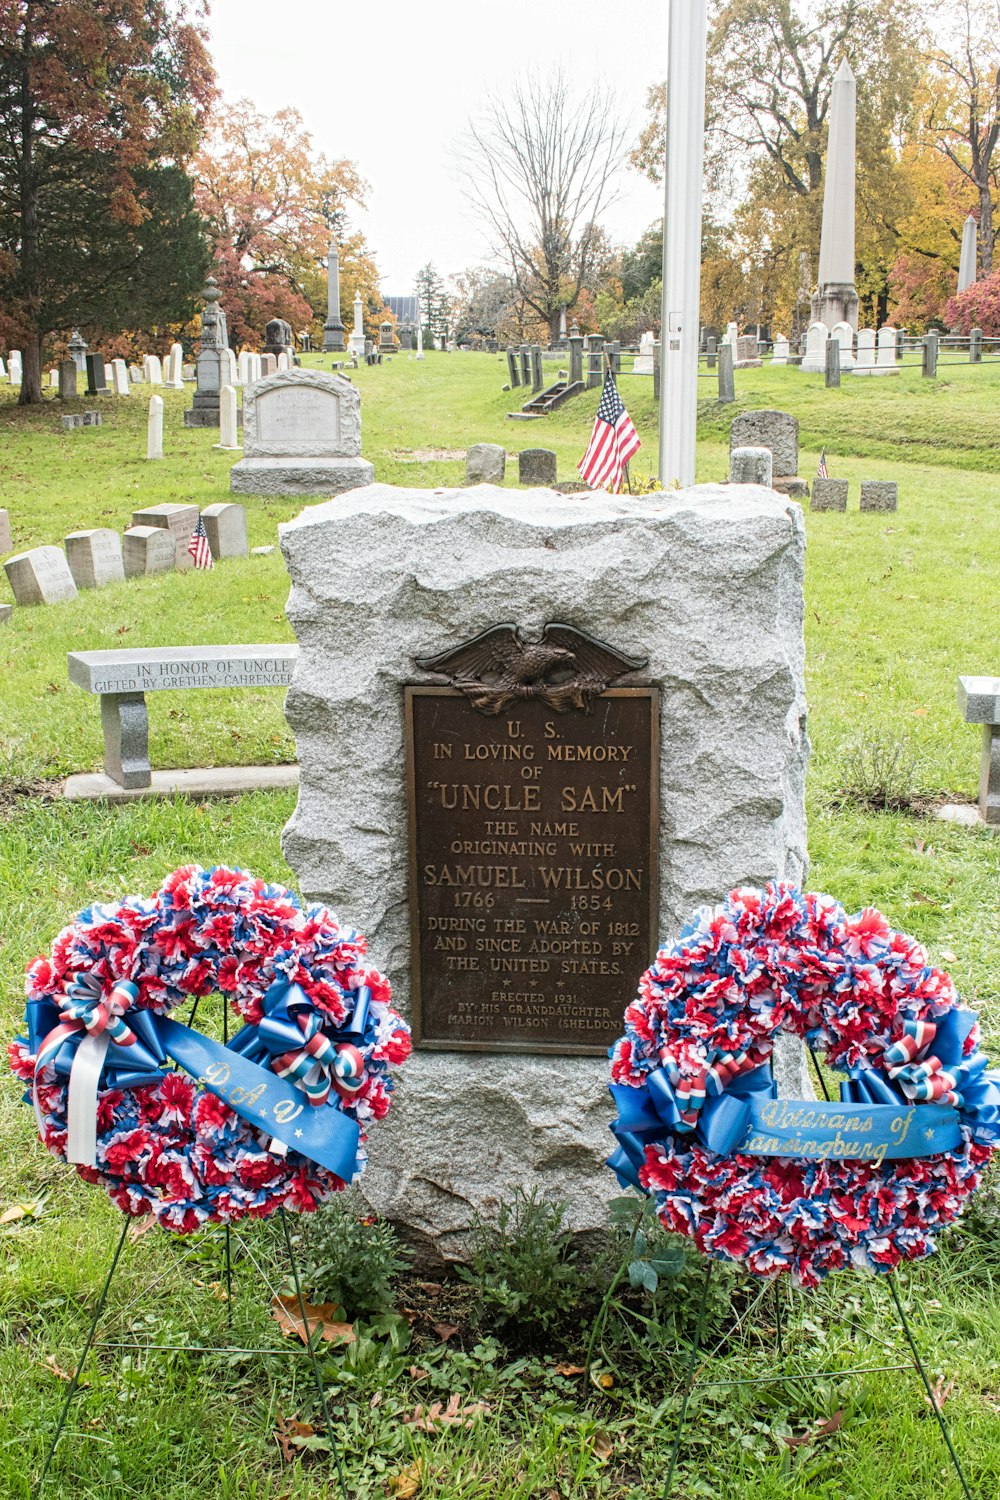 two wreaths are placed in front of a grave